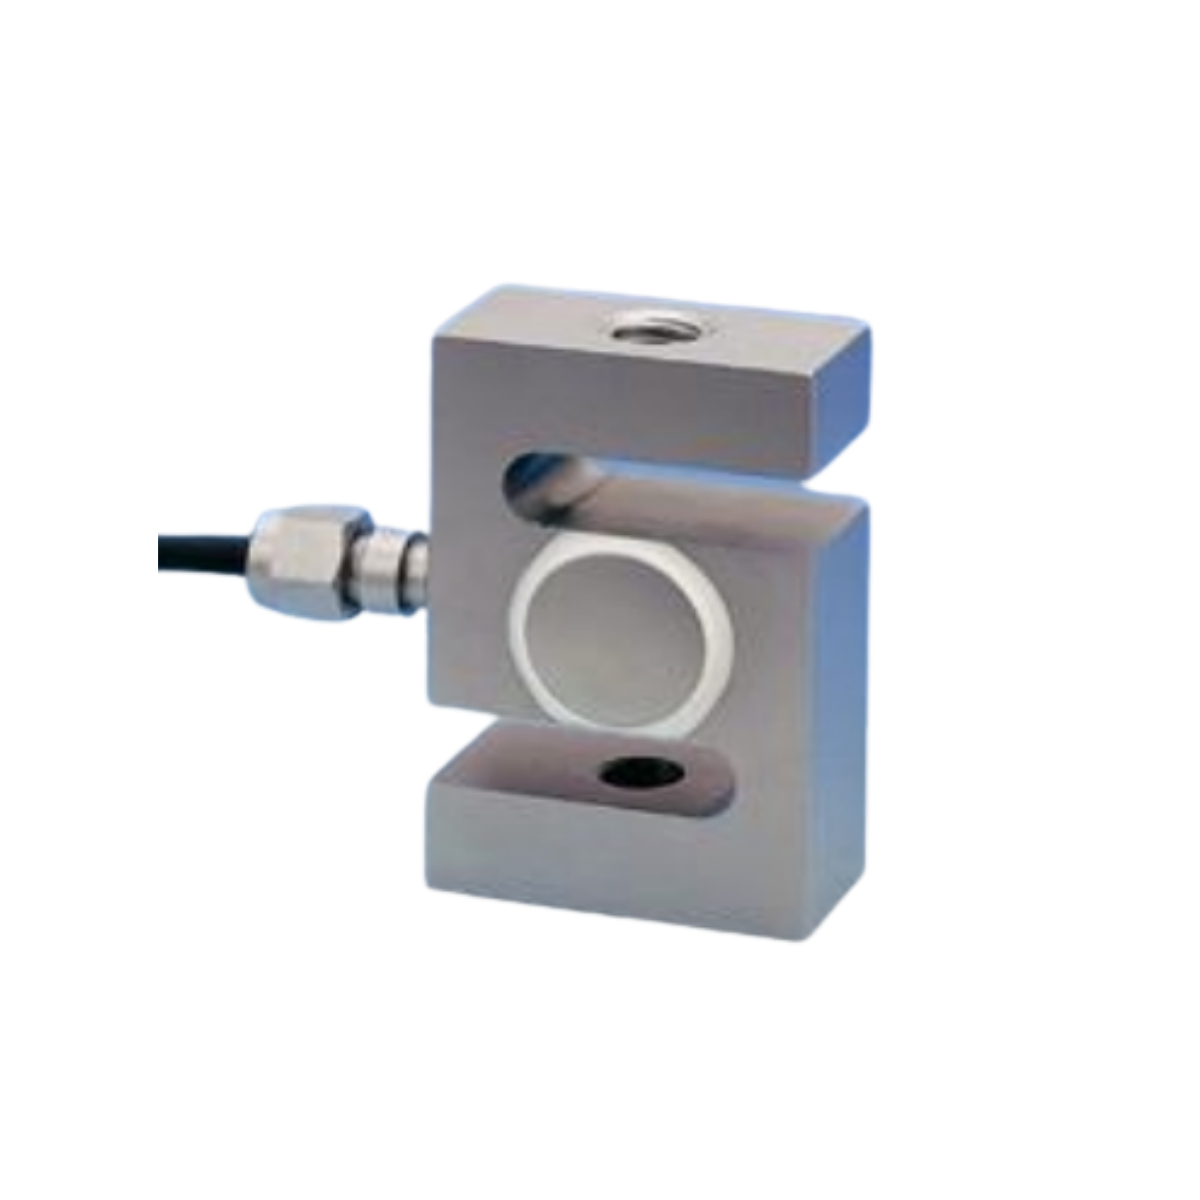 Sun Transducers STS-100LB B10 S-Beam Load Cell